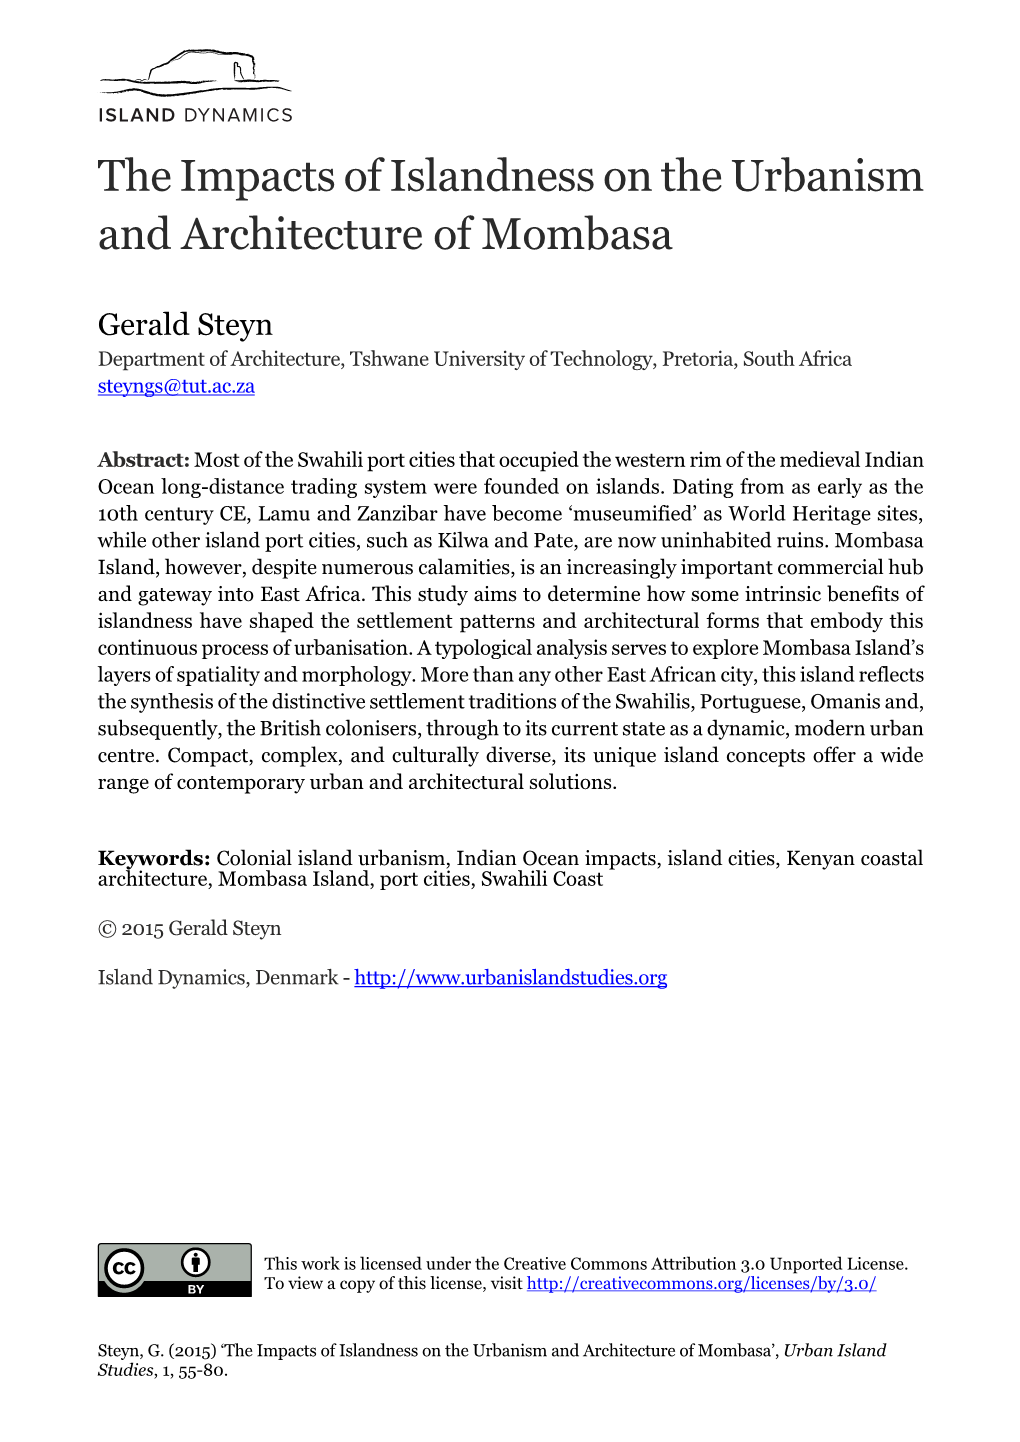 The Impacts of Islandness on the Urbanism and Architecture of Mombasa